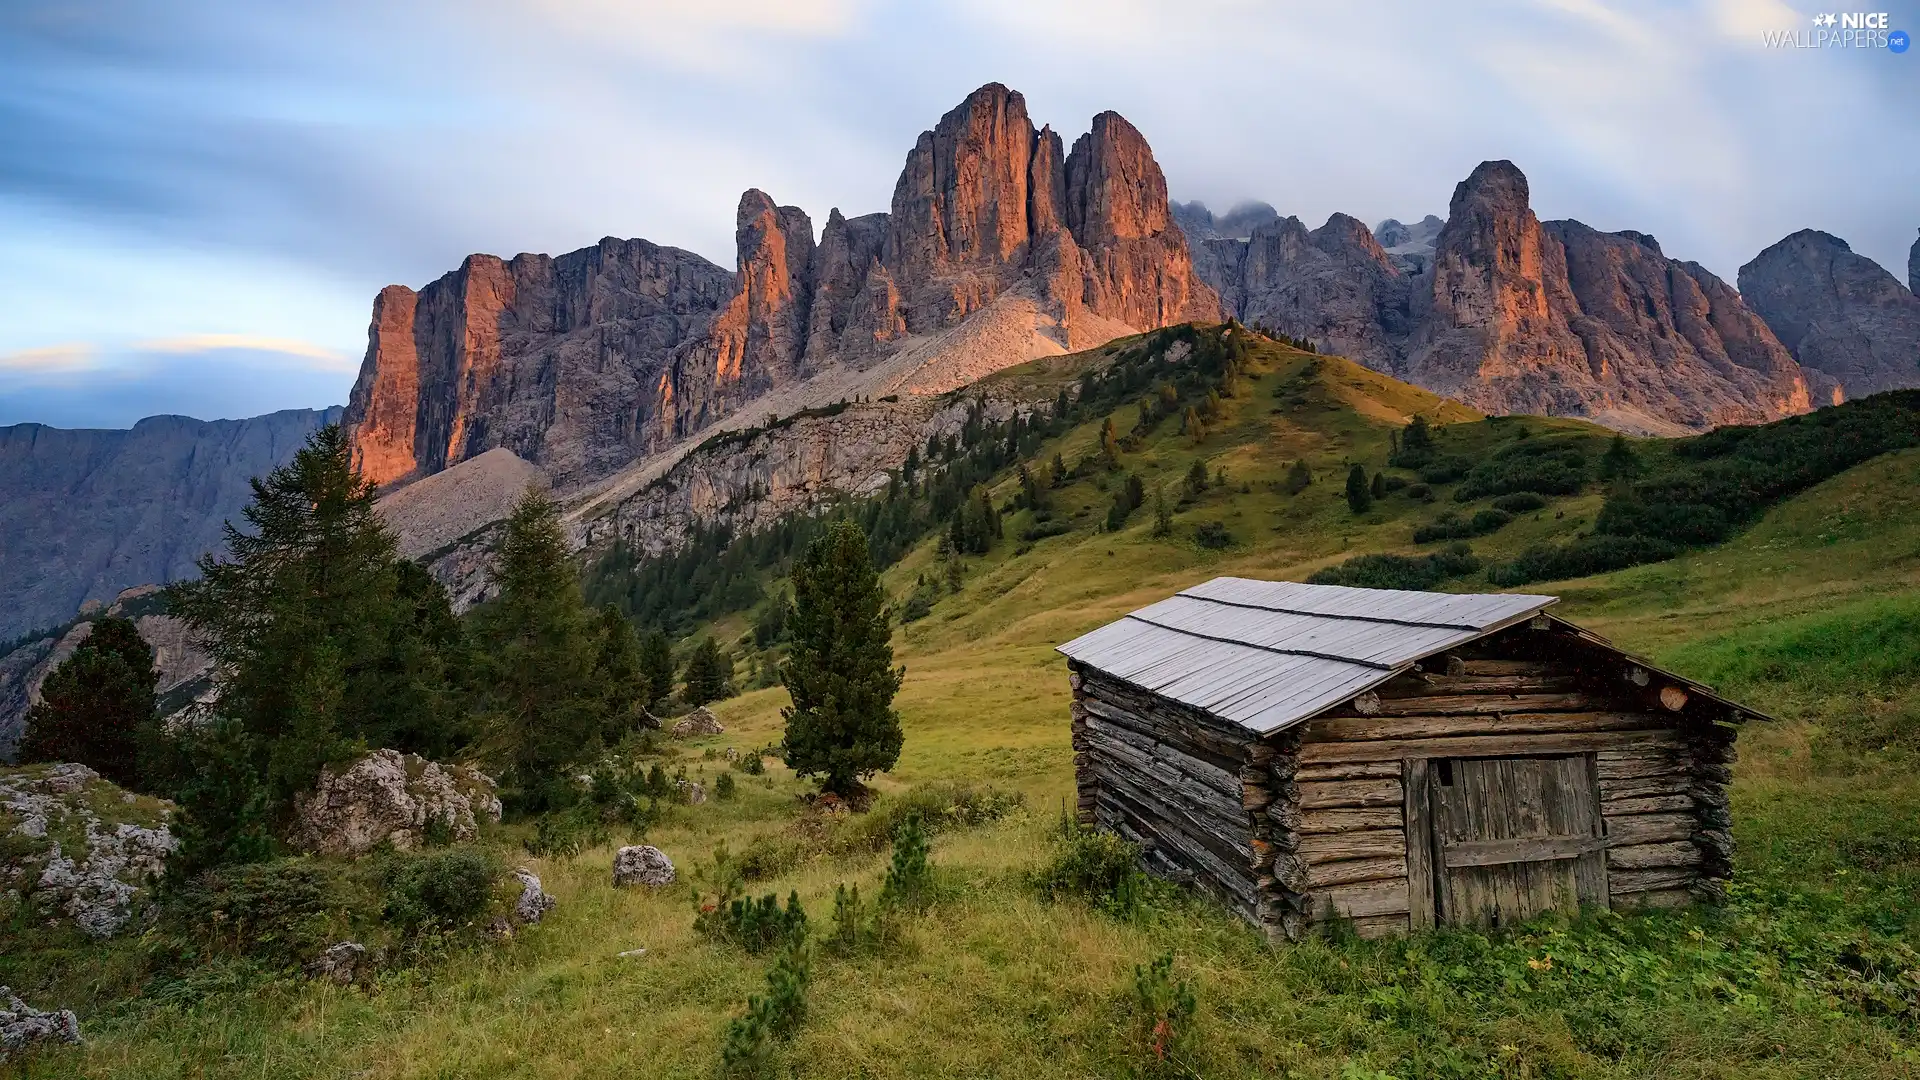 The Hills, Meadow, Dolomites, Italy, Mountains, cote